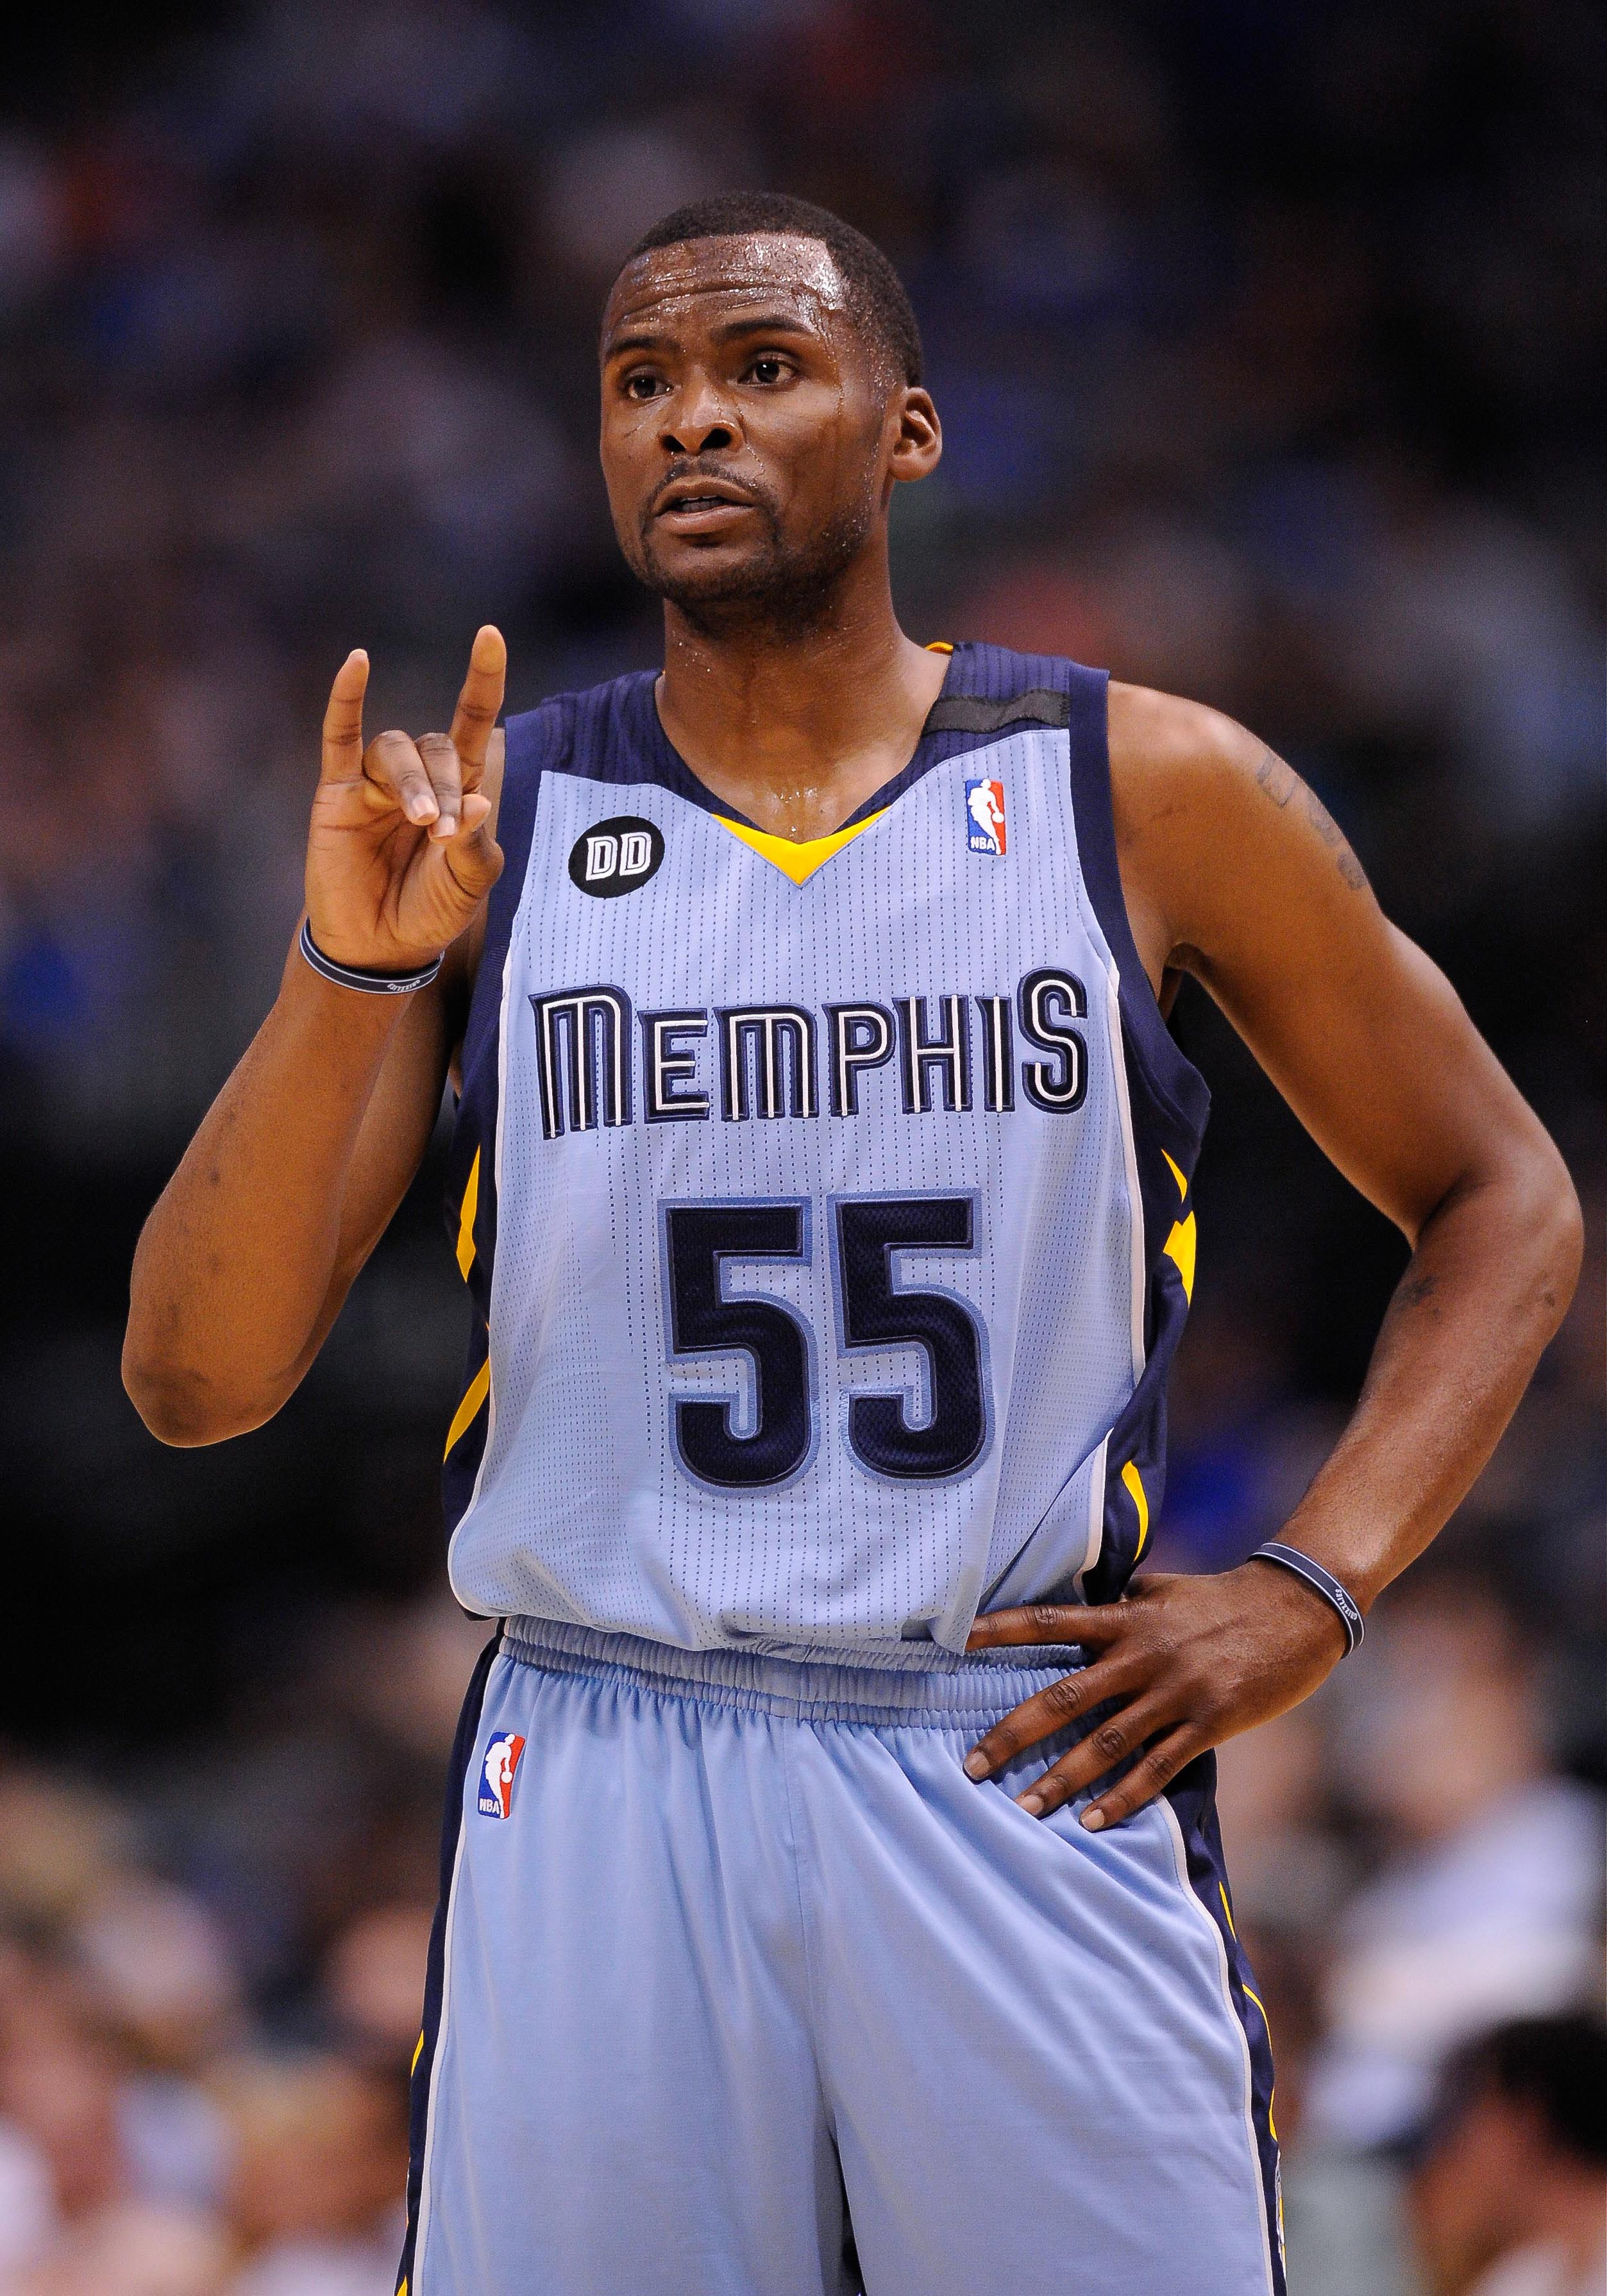 Keyon Dooling, then with the Grizzlies, waits for play to resume during a game with the Mavericks. (Jerome Miron-USA TODAY Sports)